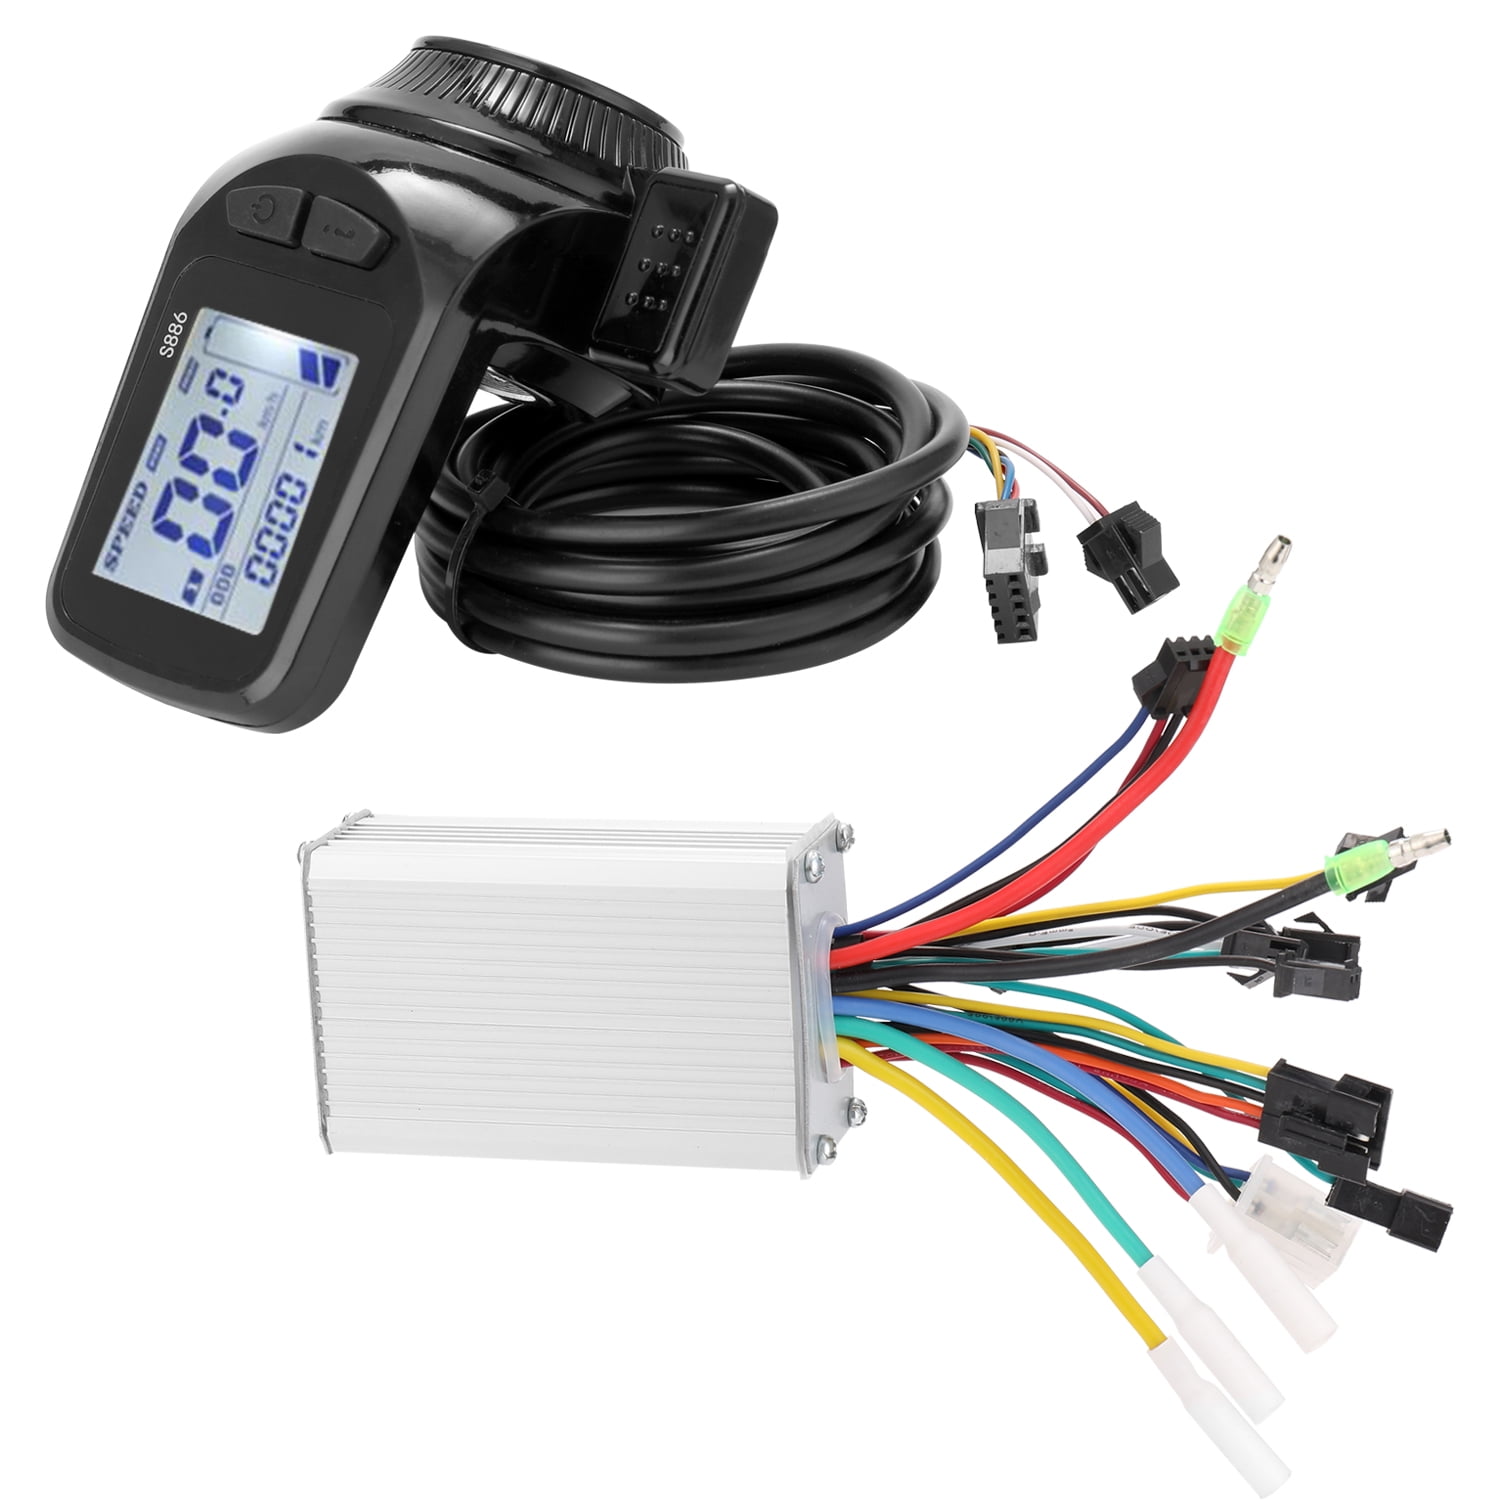 24-48V Control Electric System Controller LCD Display Bicycle Computer Cycling